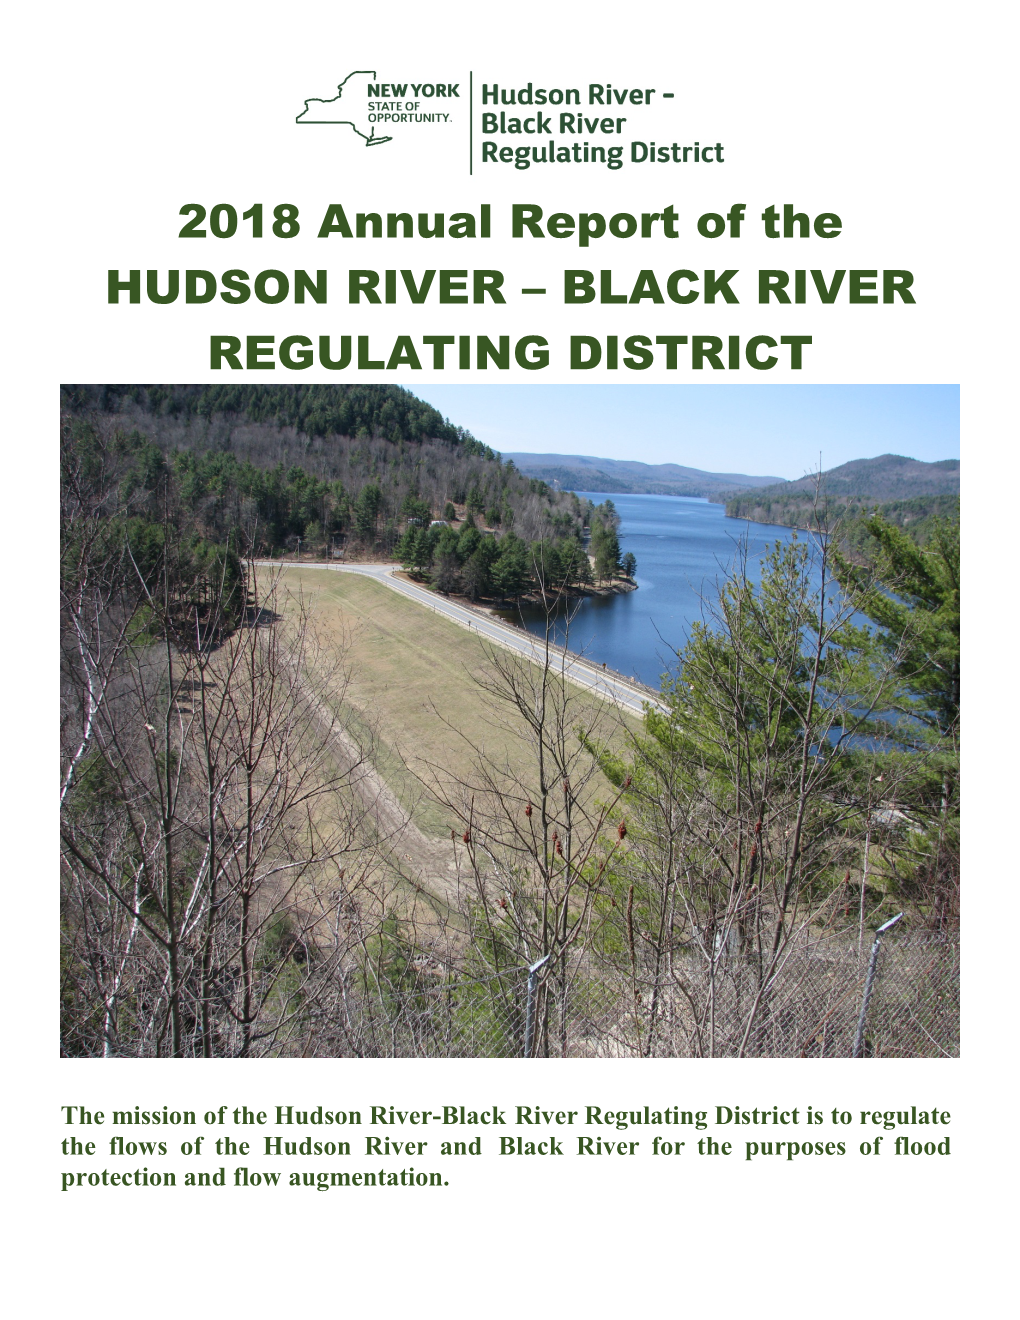 2018 Annual Report of the HUDSON RIVER – BLACK RIVER REGULATING DISTRICT